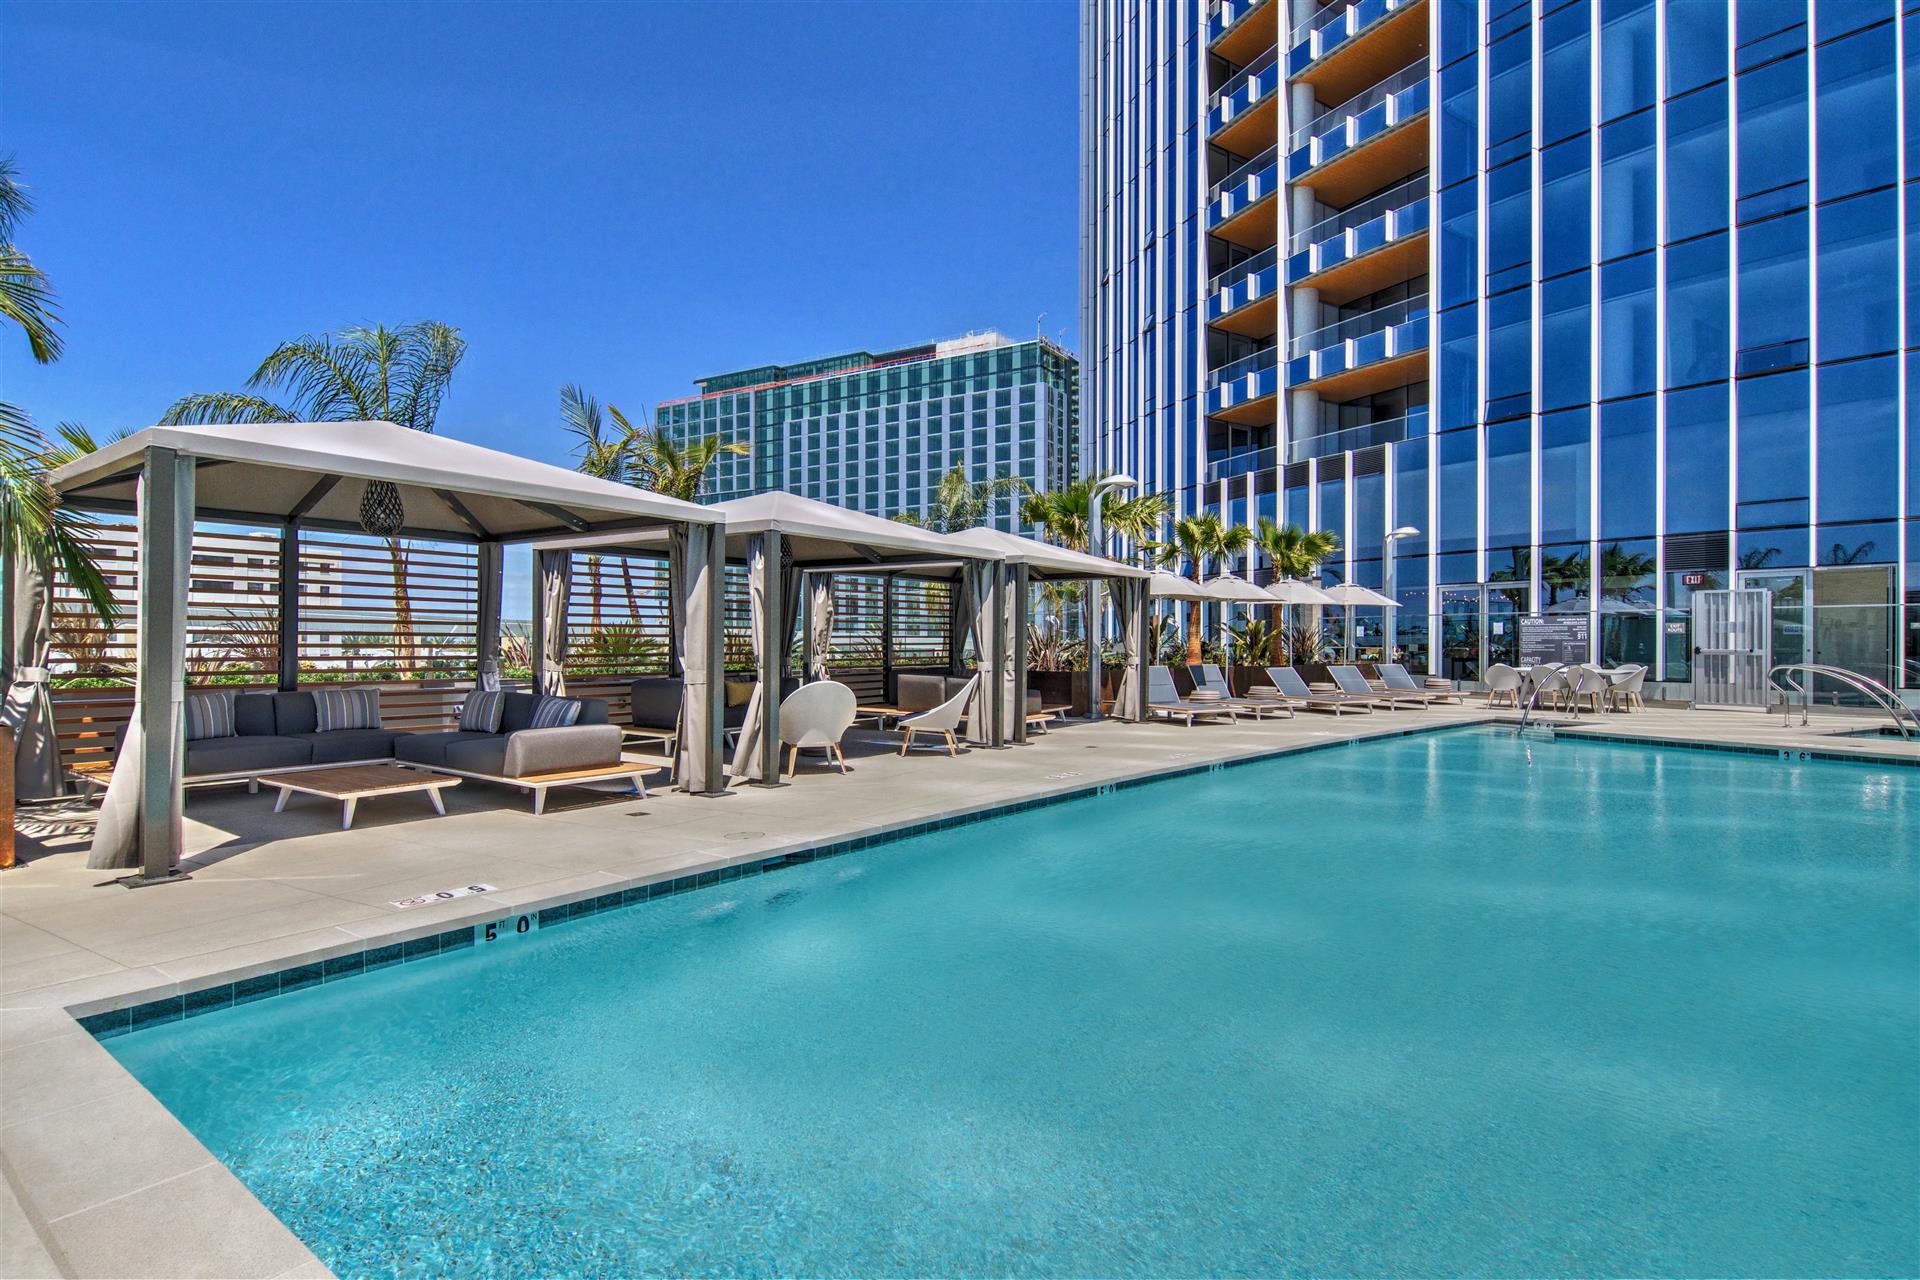 Pool deck at Pacific Gate condo tower in downtown San Diego